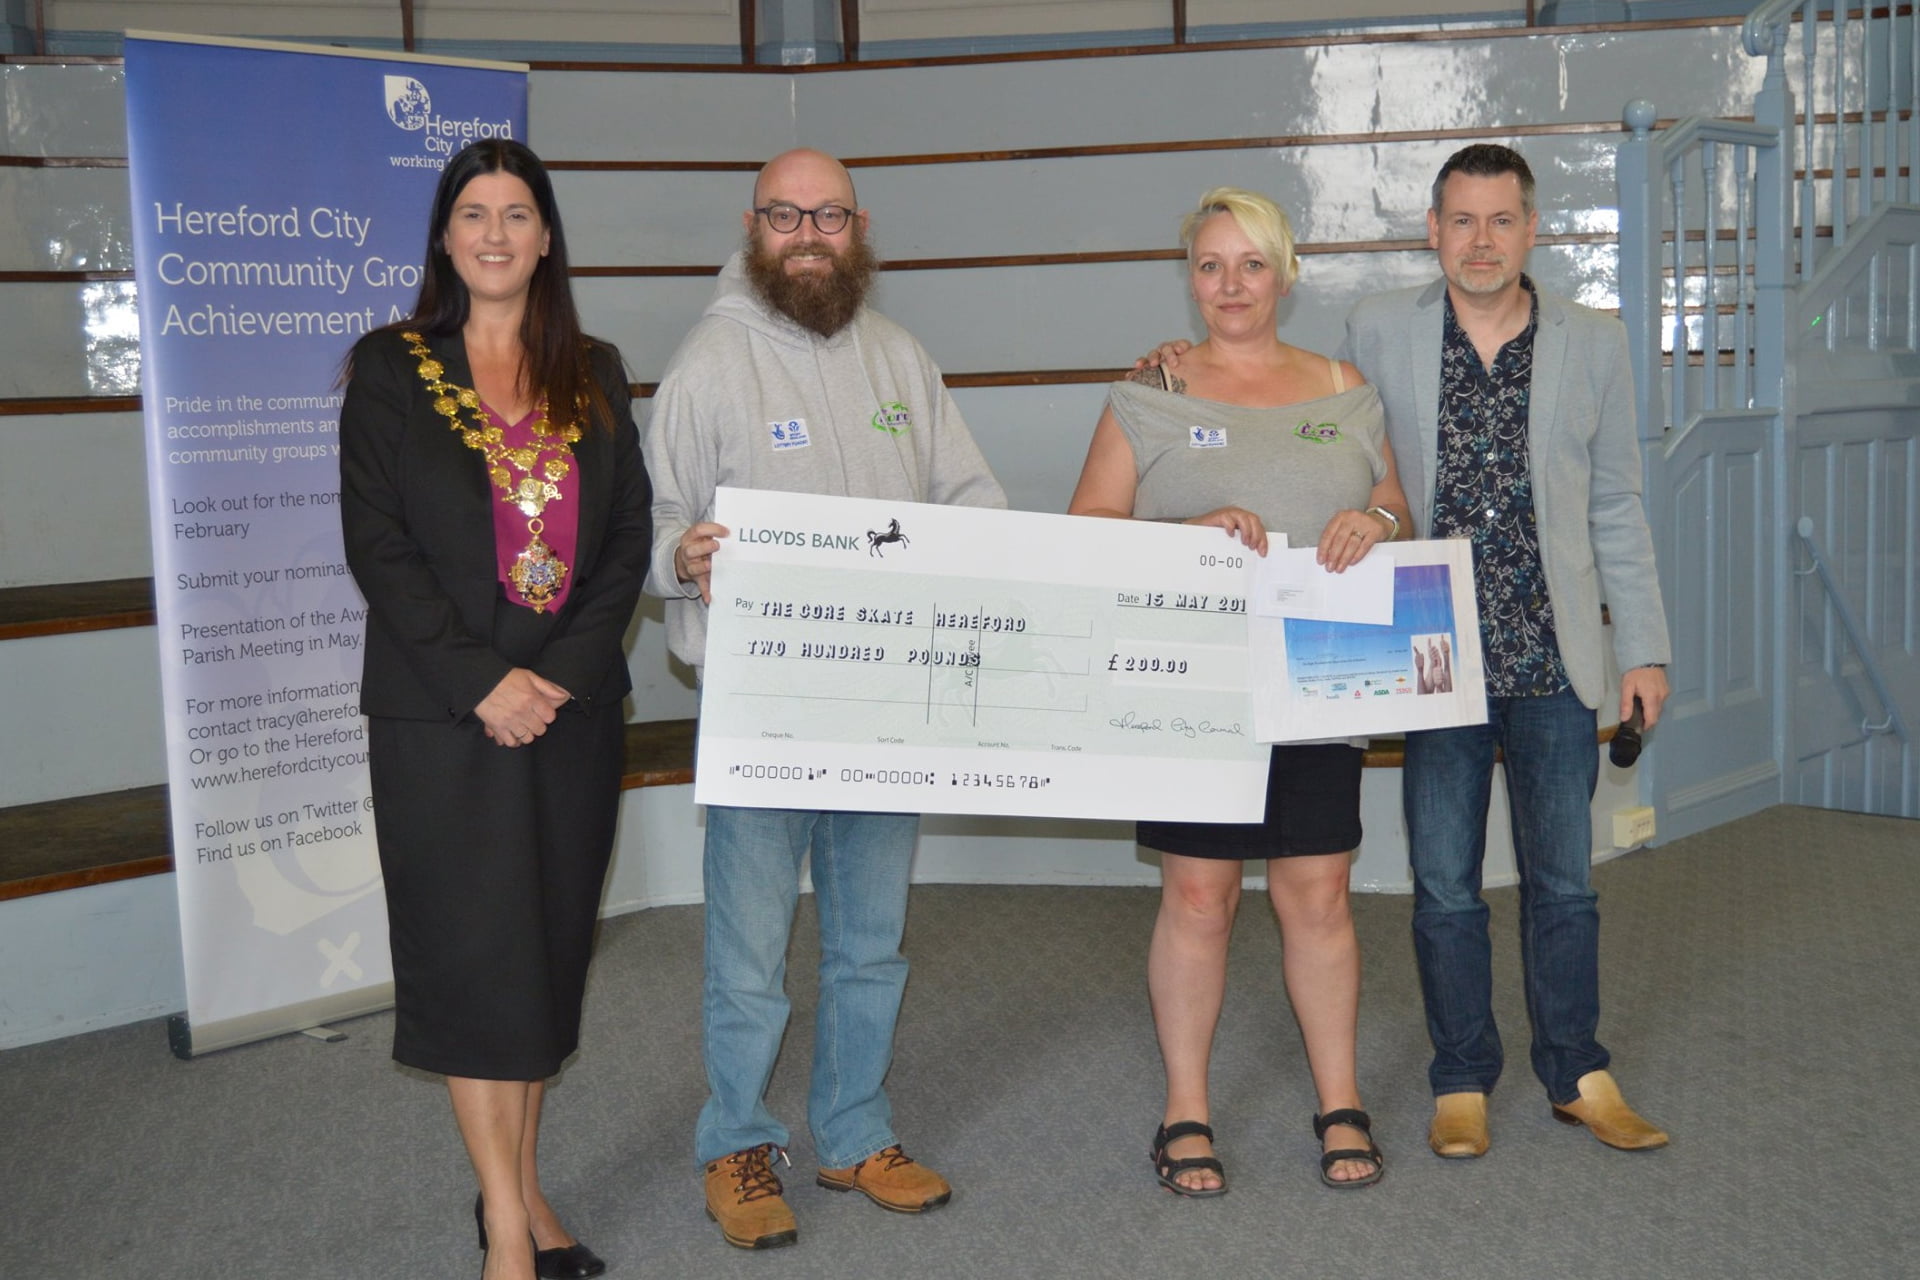 In 3rd place – The Core Skate Hereford CIC, who received a cheque for £200